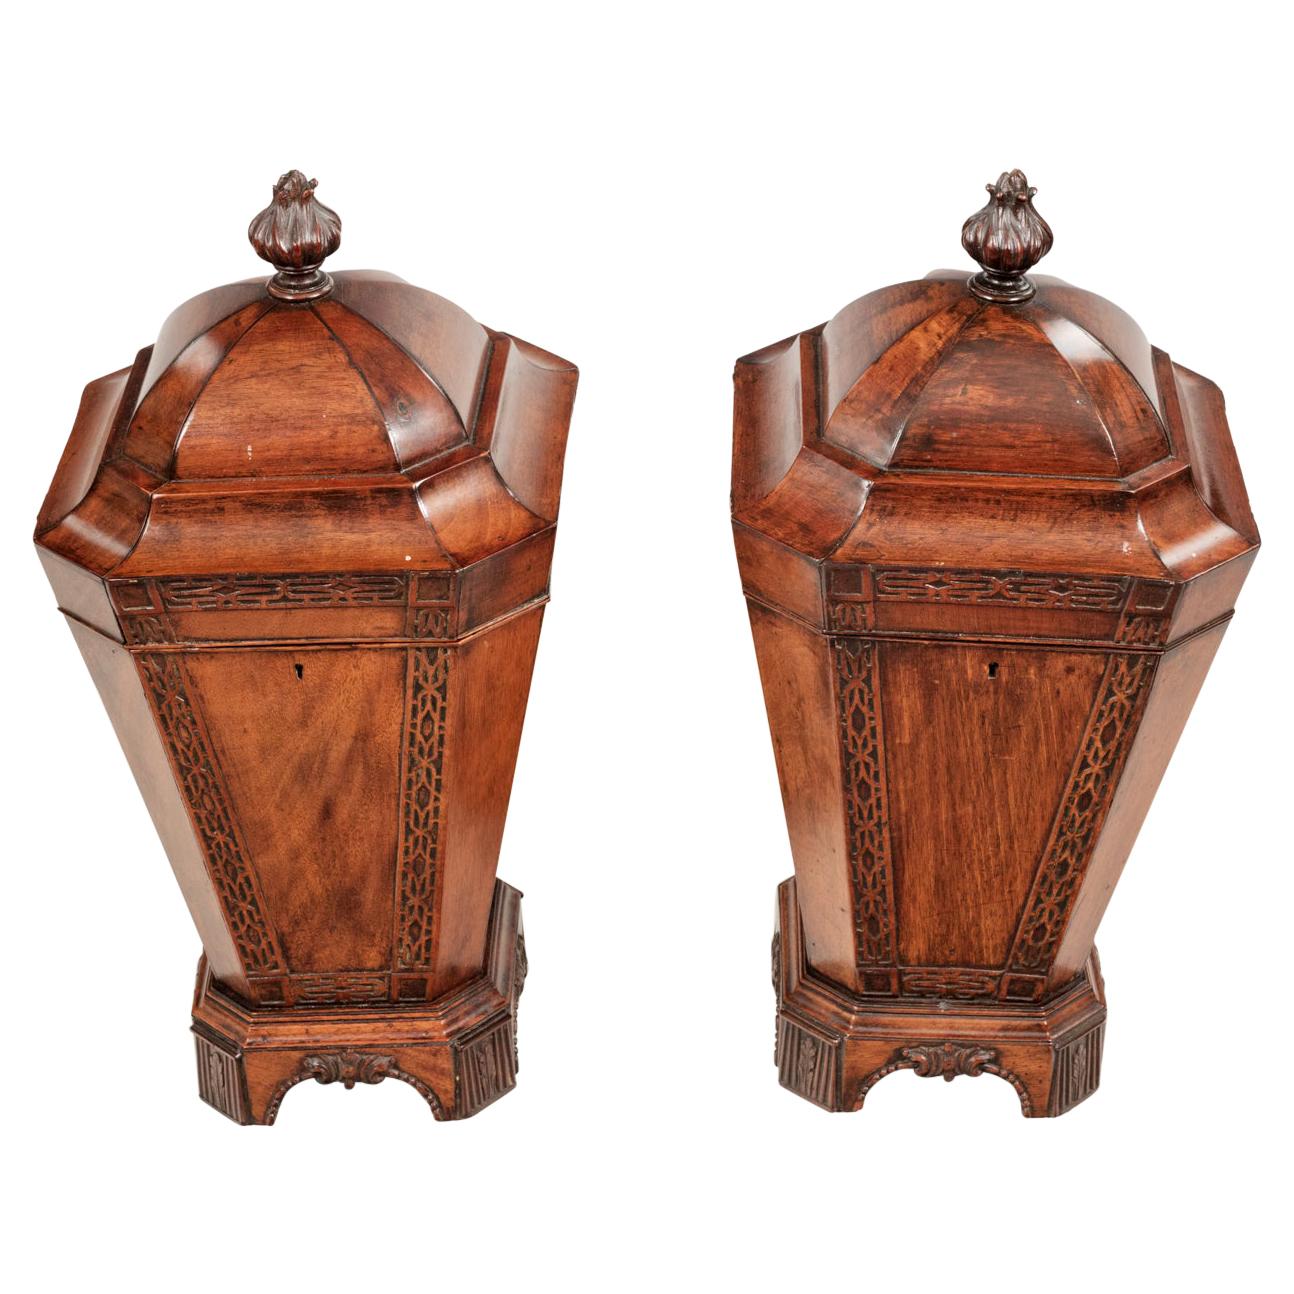 Early 19th Century George III Pair of Mahogany Knife Urns